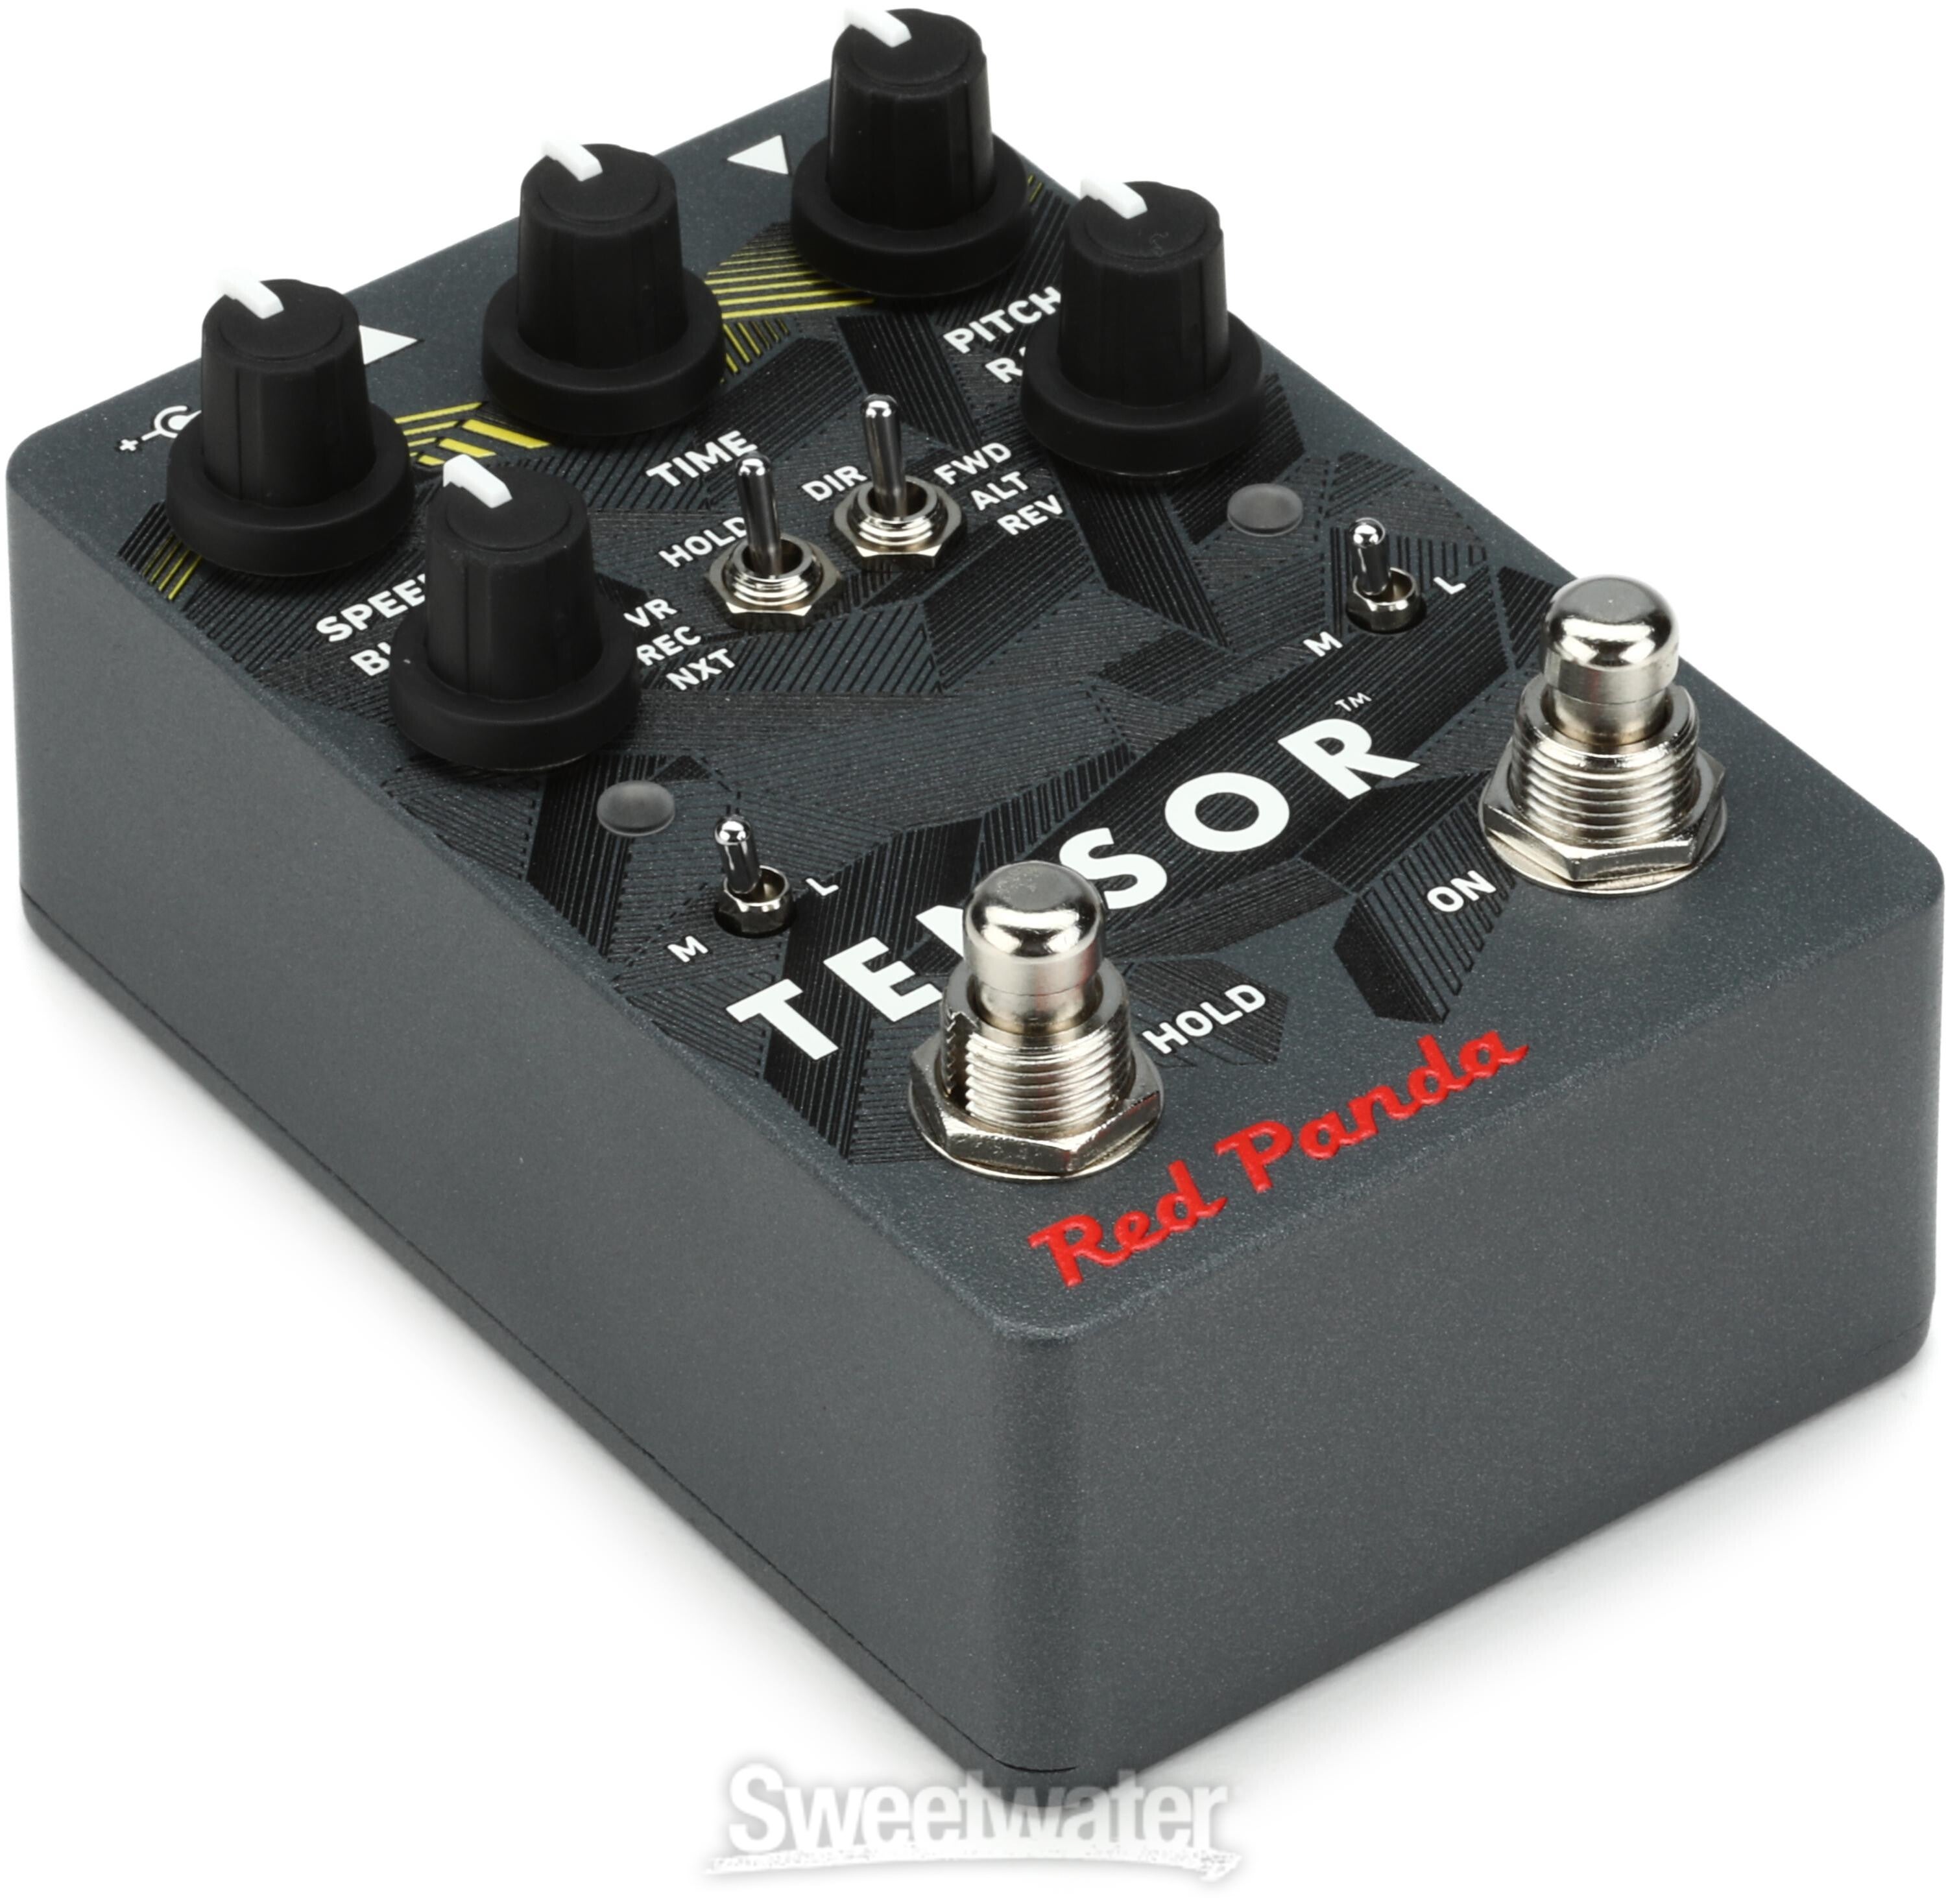 Red Panda Tensor Pitch- and Time-Shifting Pedal | Sweetwater